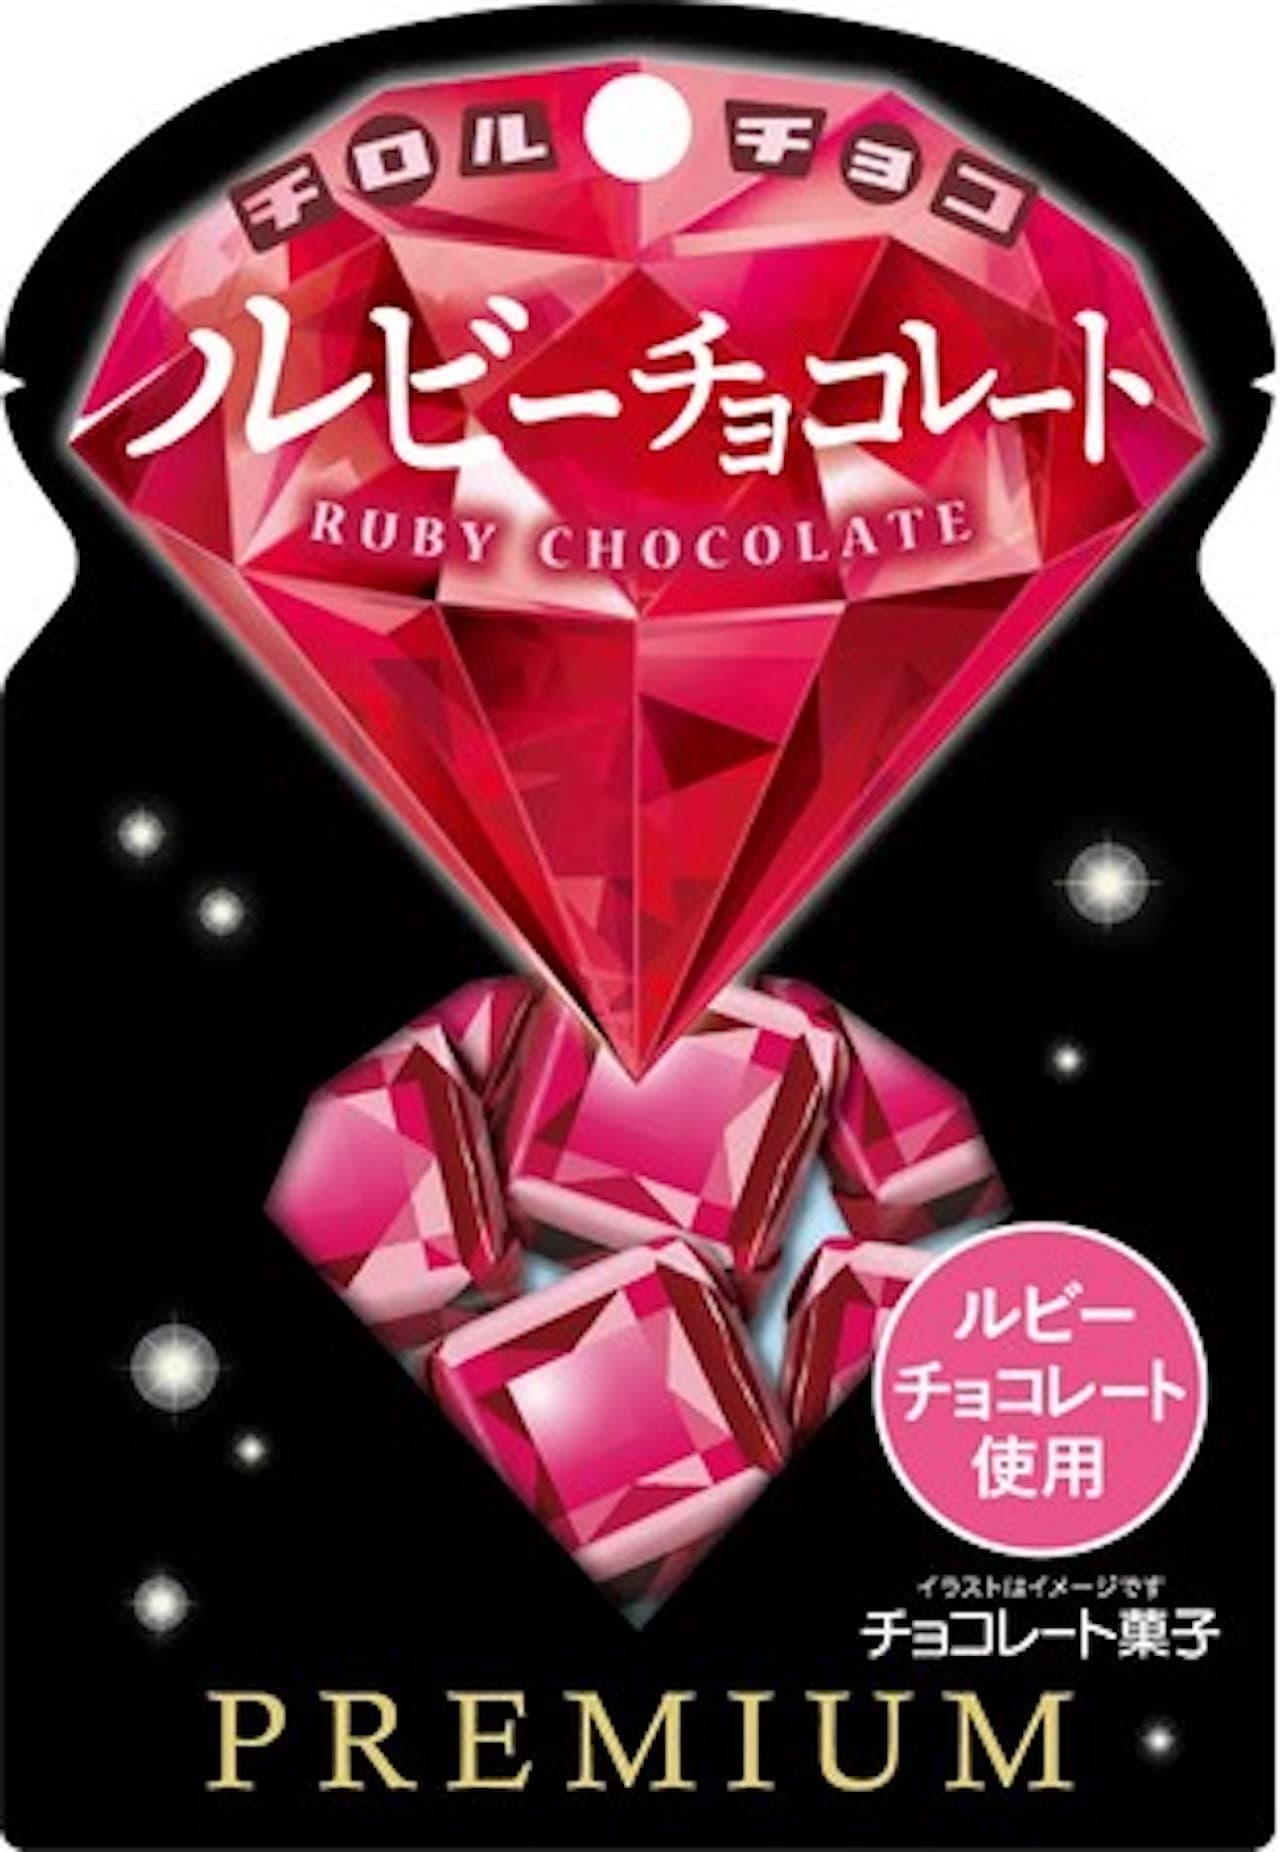 Tyrolean chocolate "Premium Ruby Chocolate Pouch"